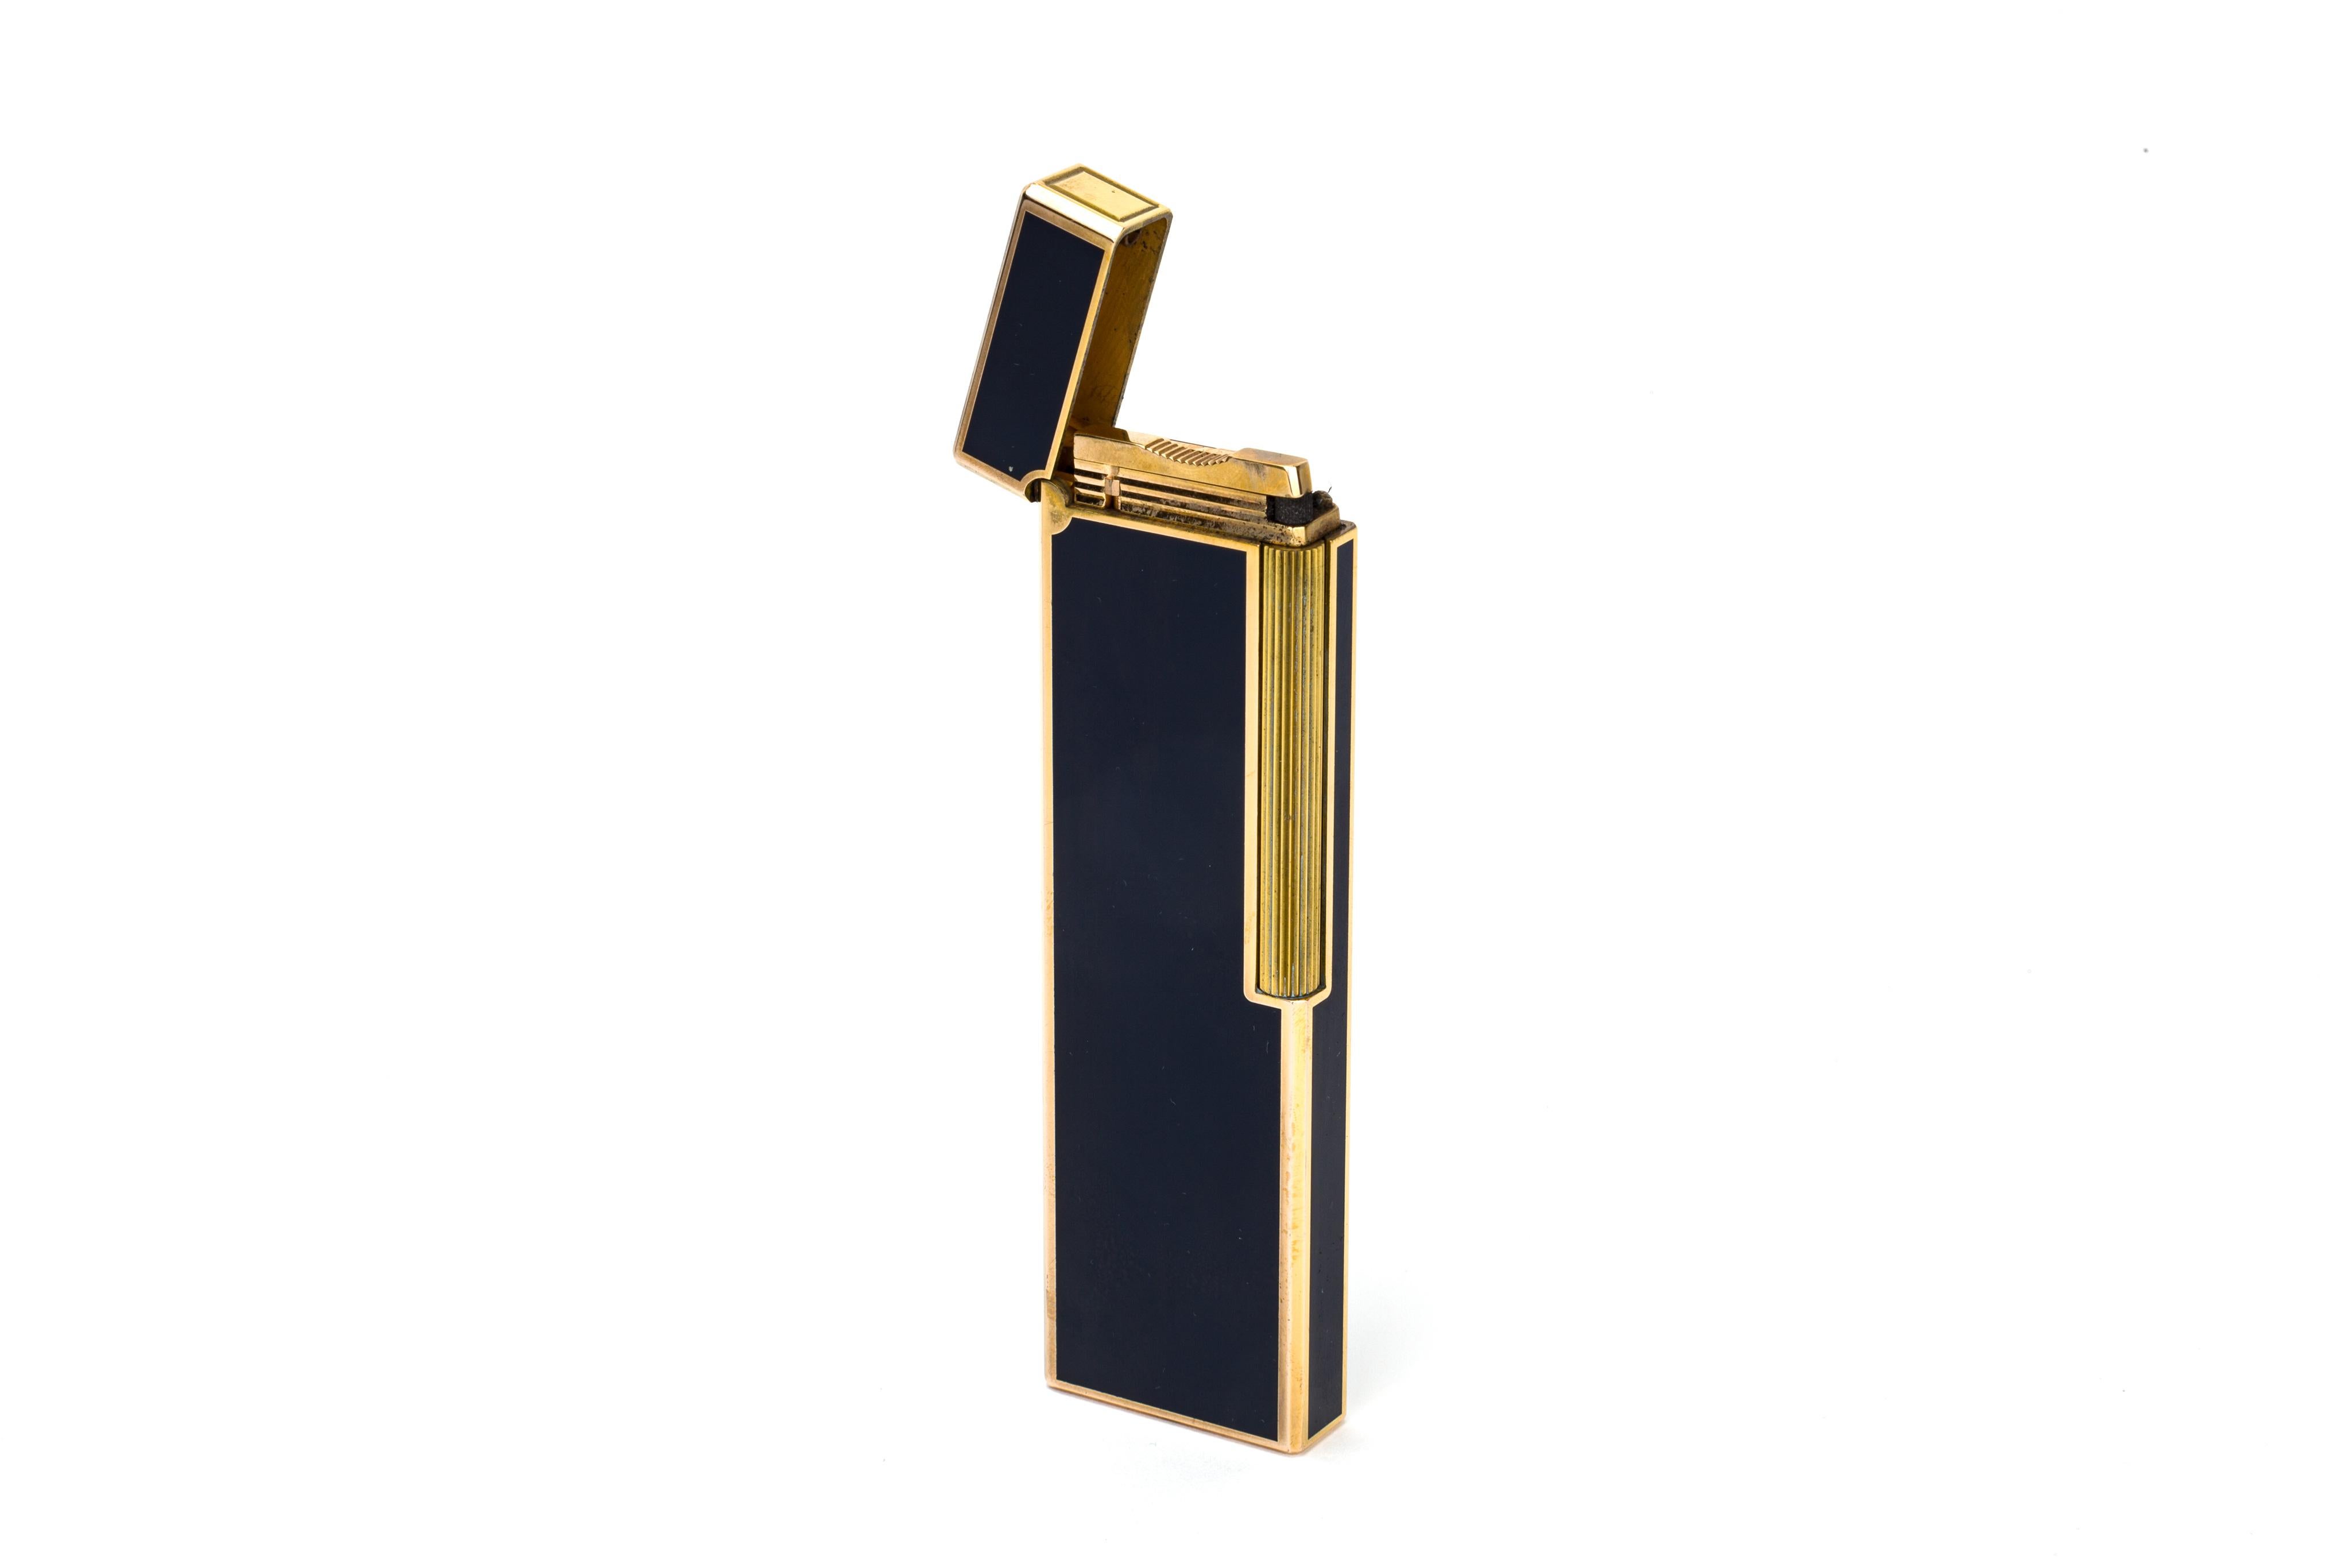 A gorgeous table-lighter from S.T. Dupont, done in a baked cerulean enamel and gilt edges. 

Lighter is in full working condition.